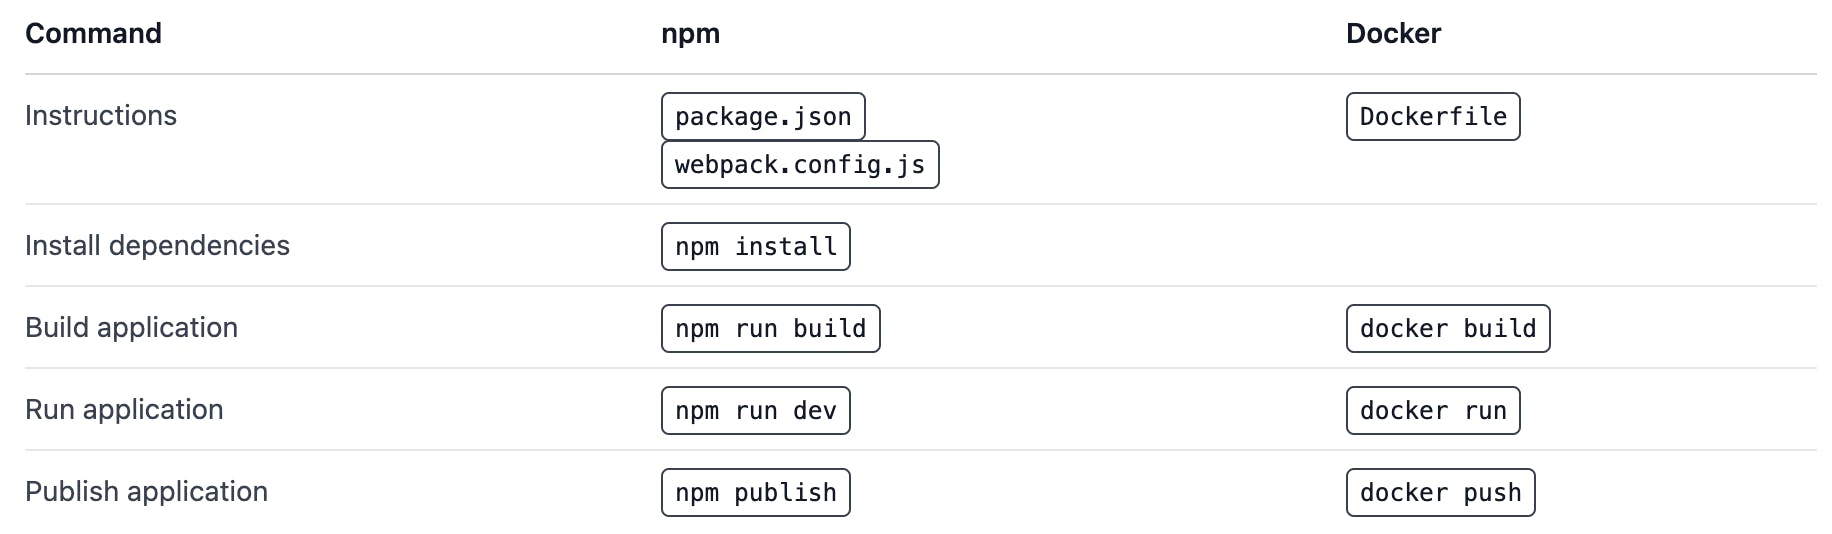 Comparision of npm and Docker commands